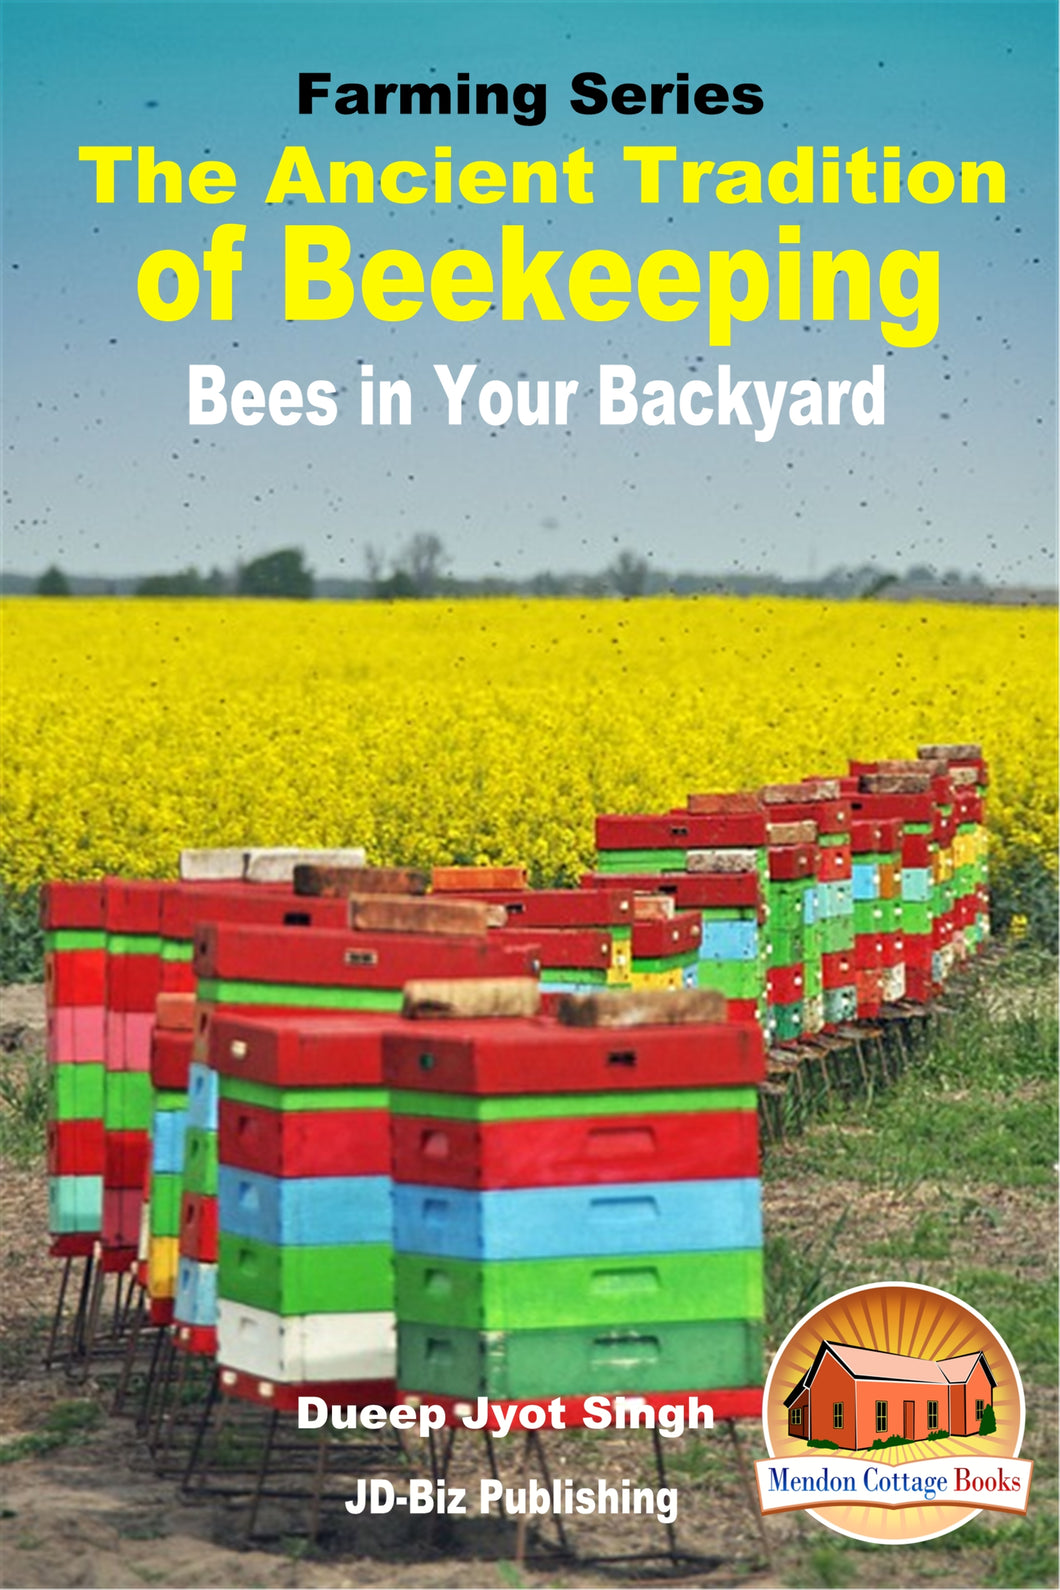 The Ancient Tradition of Beekeeping